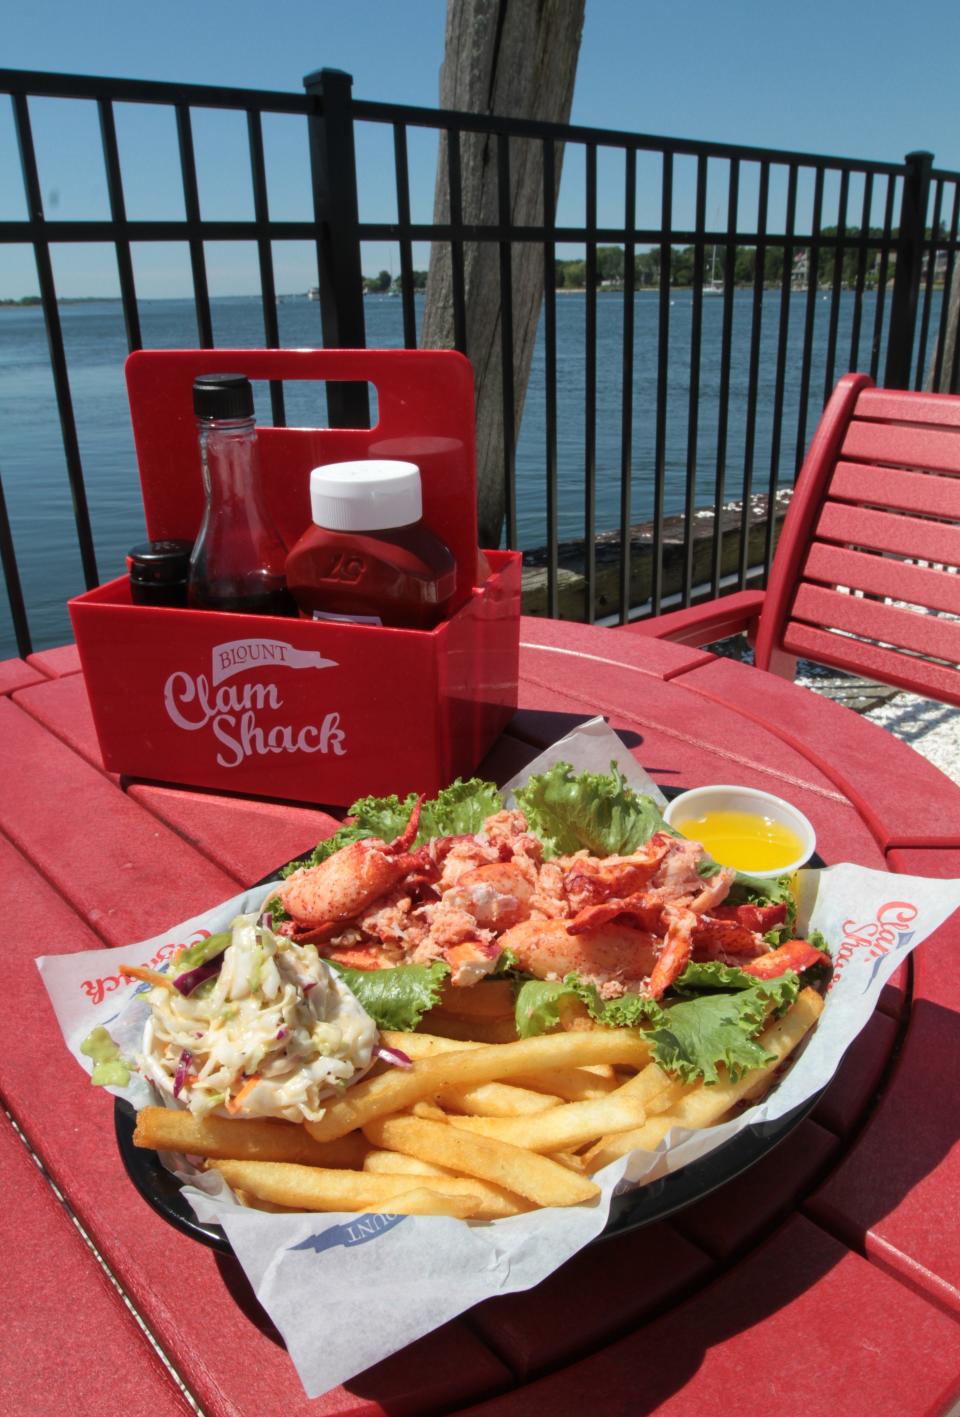 Blount Clam Shack on the Waterfront in Warren is one of many great dining spots to enjoy a lobster roll by the water in a casual way.